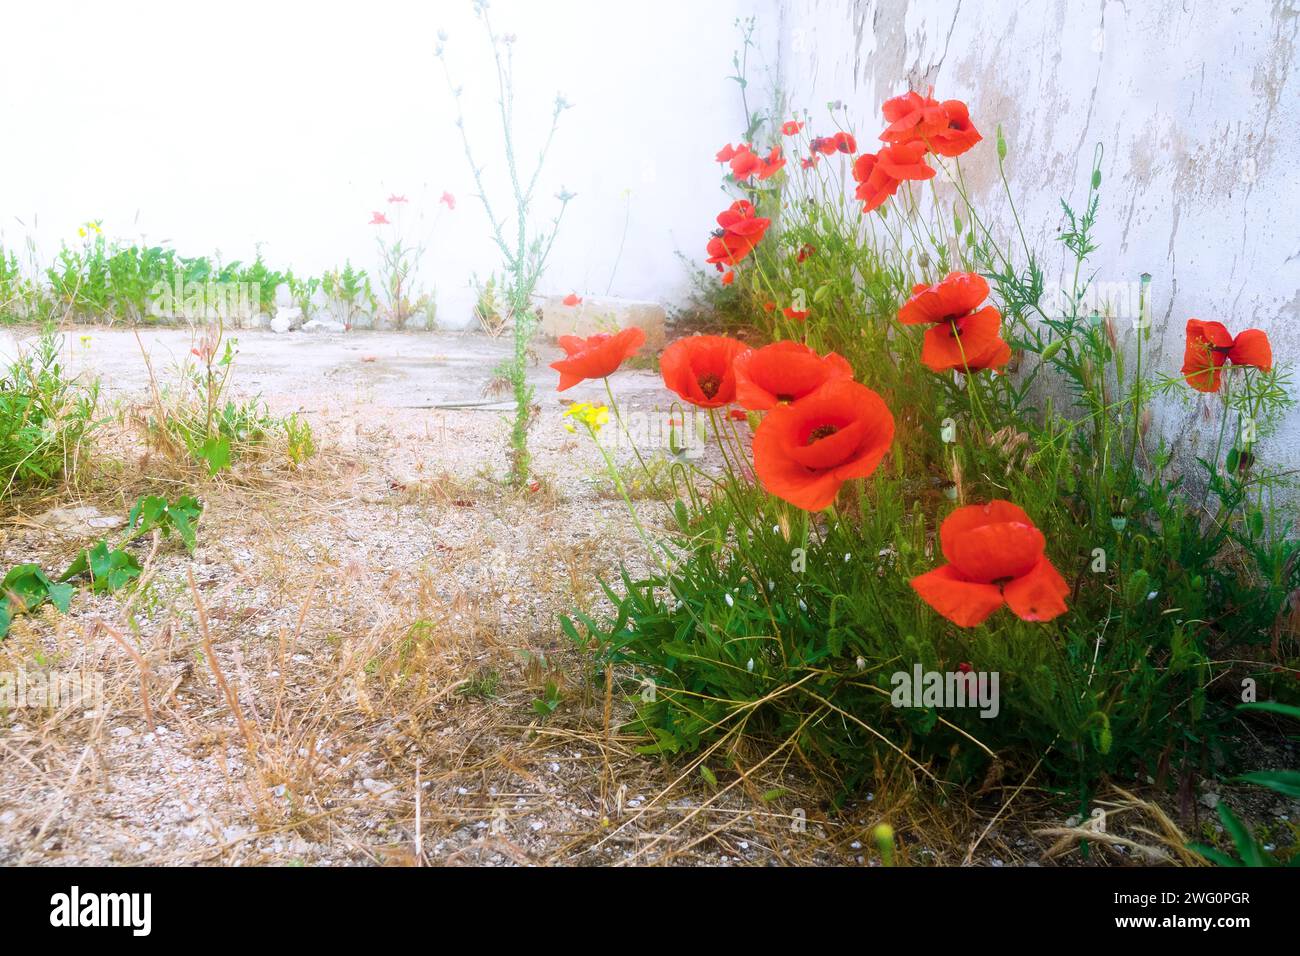 Poppies in a south neglected garden. Red poppy (Papaver rhoeas) Stock Photo